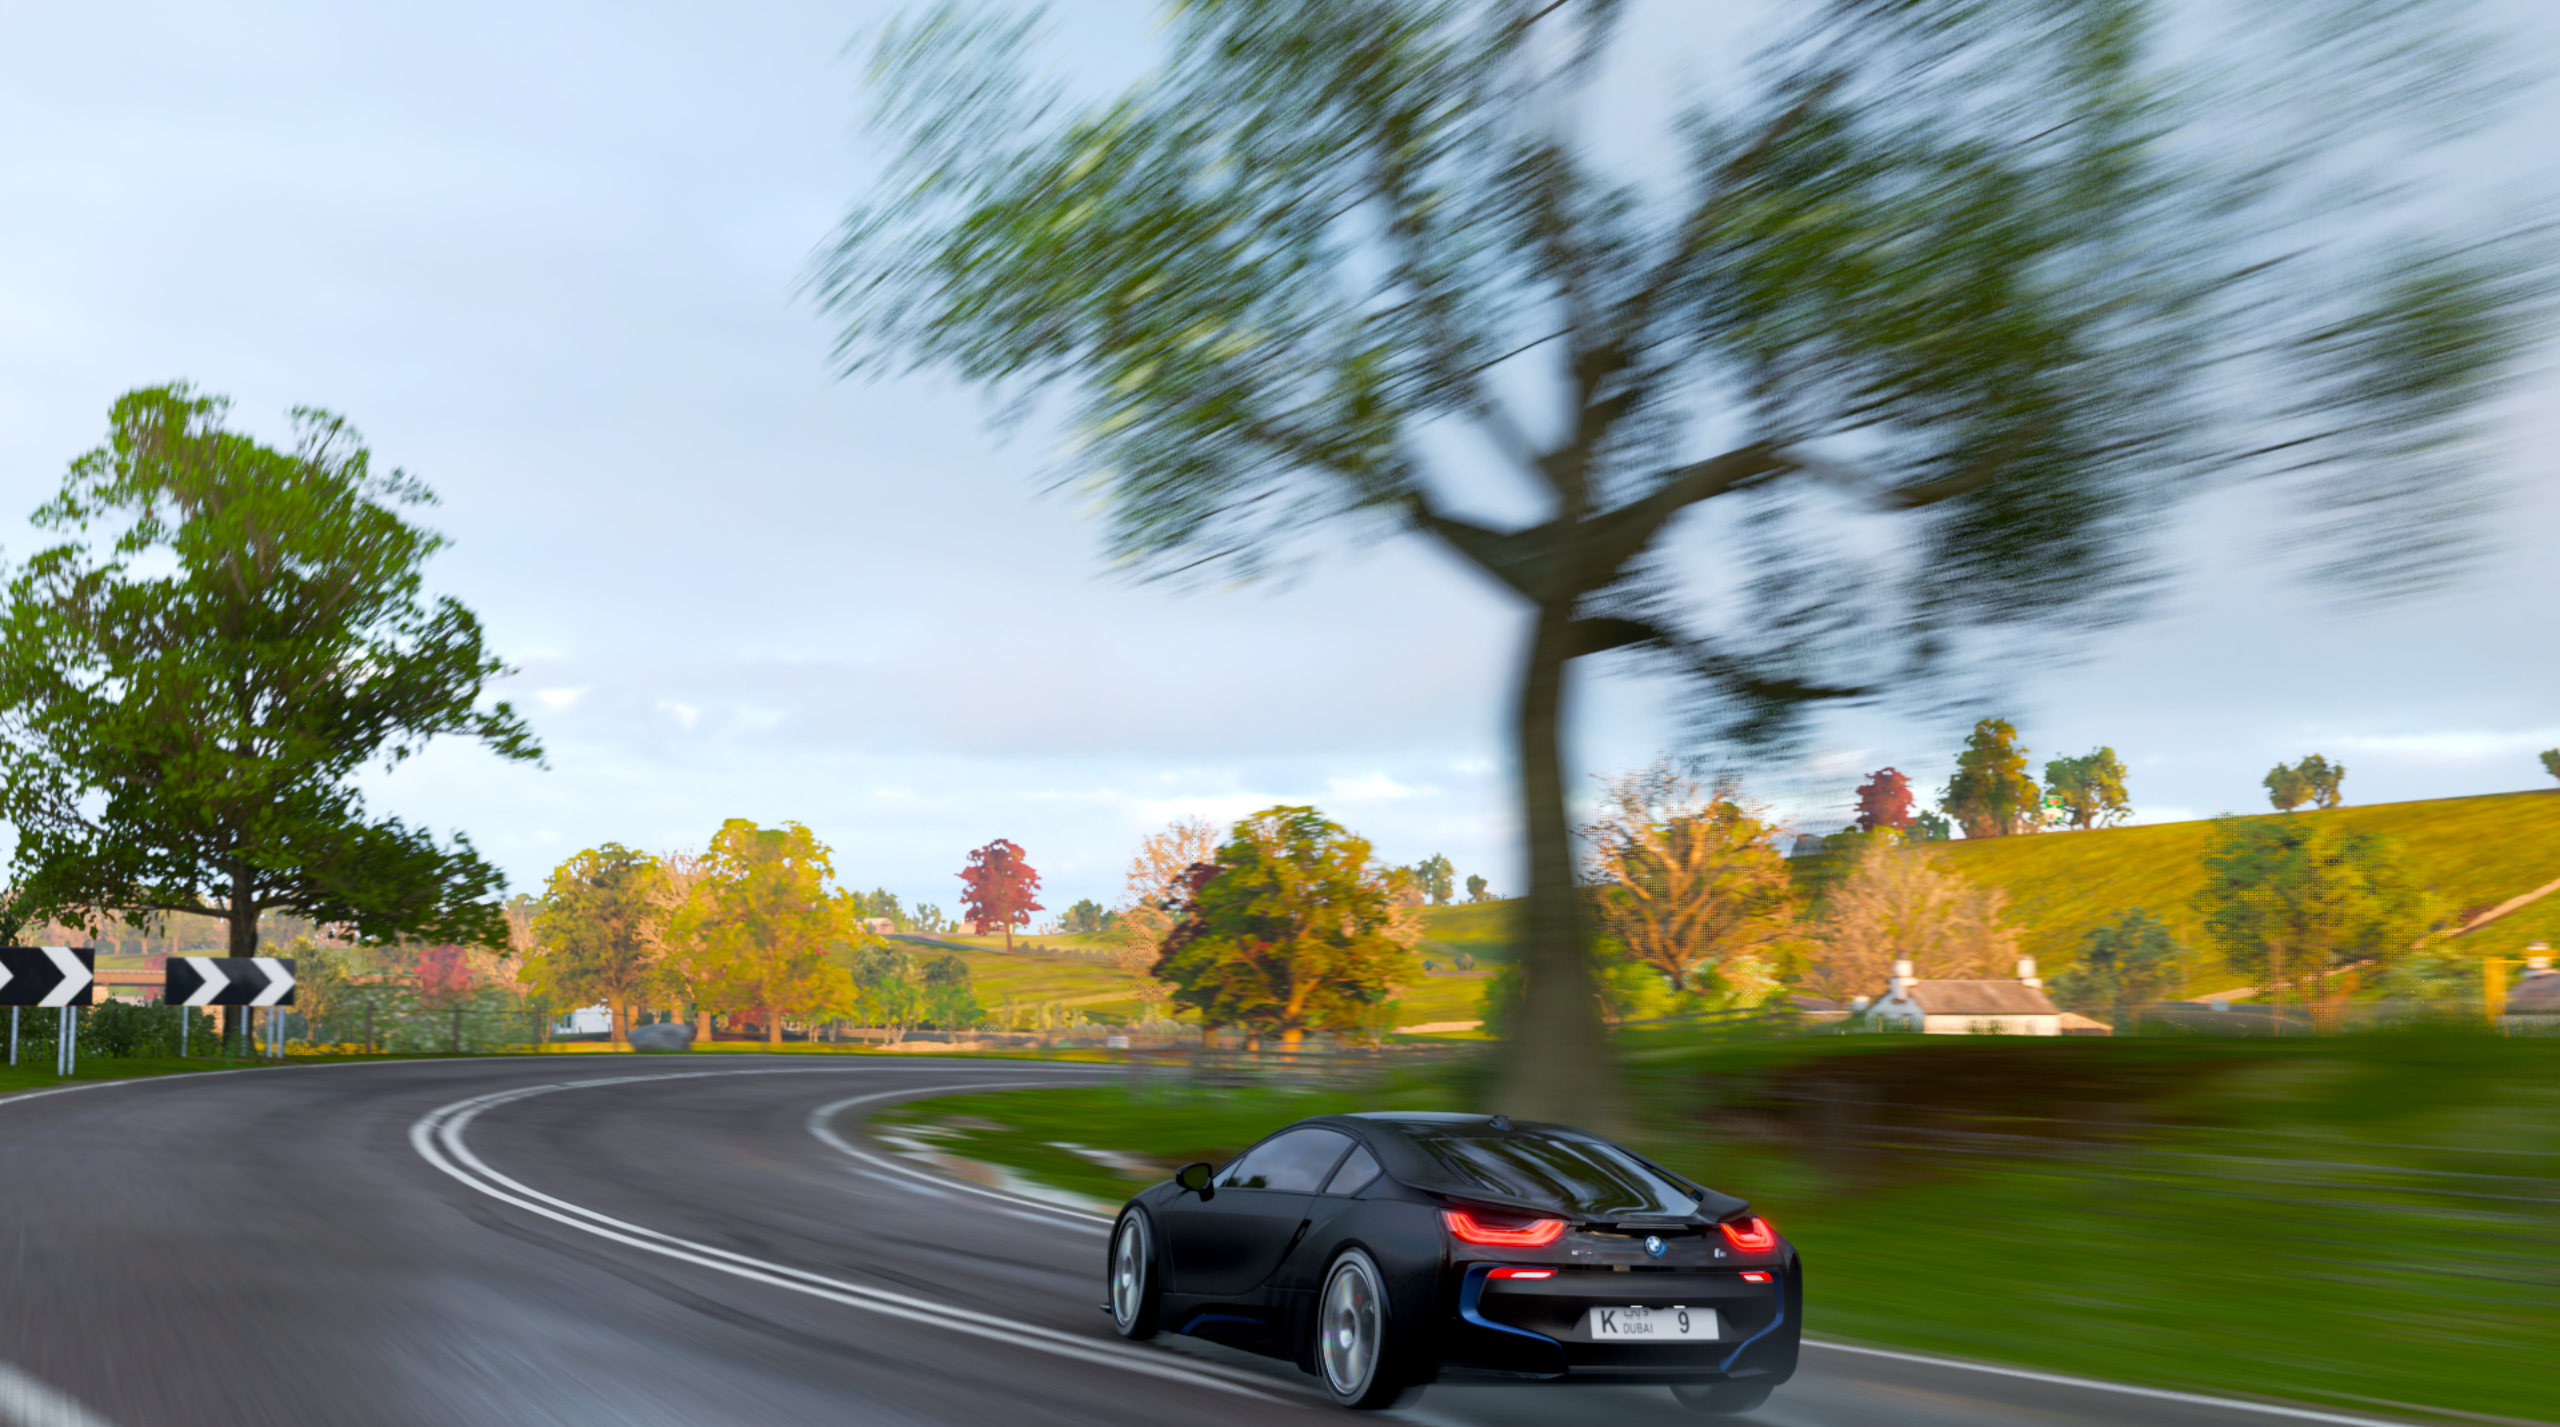 General 2560x1427 horizon line art BMW i8 taillights depth of field car motion blur rear view trees clouds sky driving BMW German cars hybrid (car) Forza Horizon 4 video games PlaygroundGames